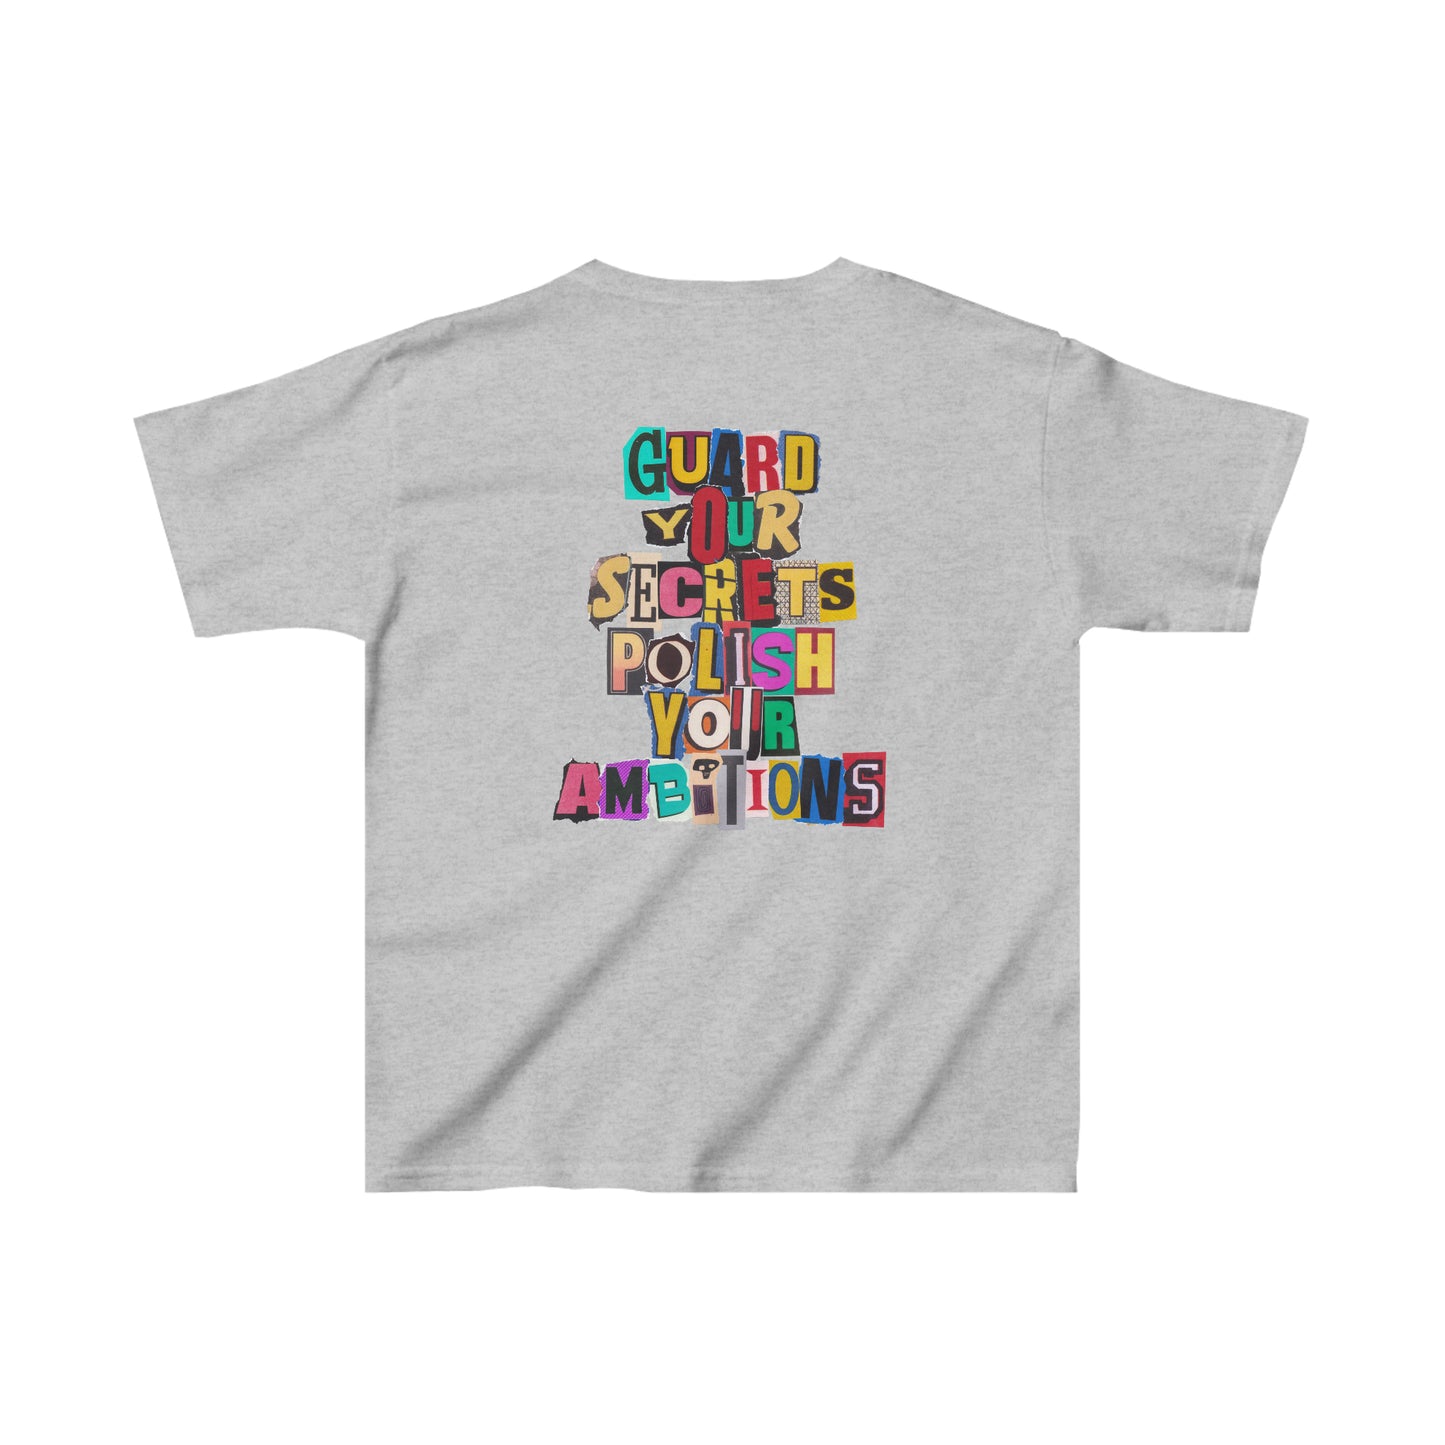 Youth WIY x Doncic Vintage T-Shirt